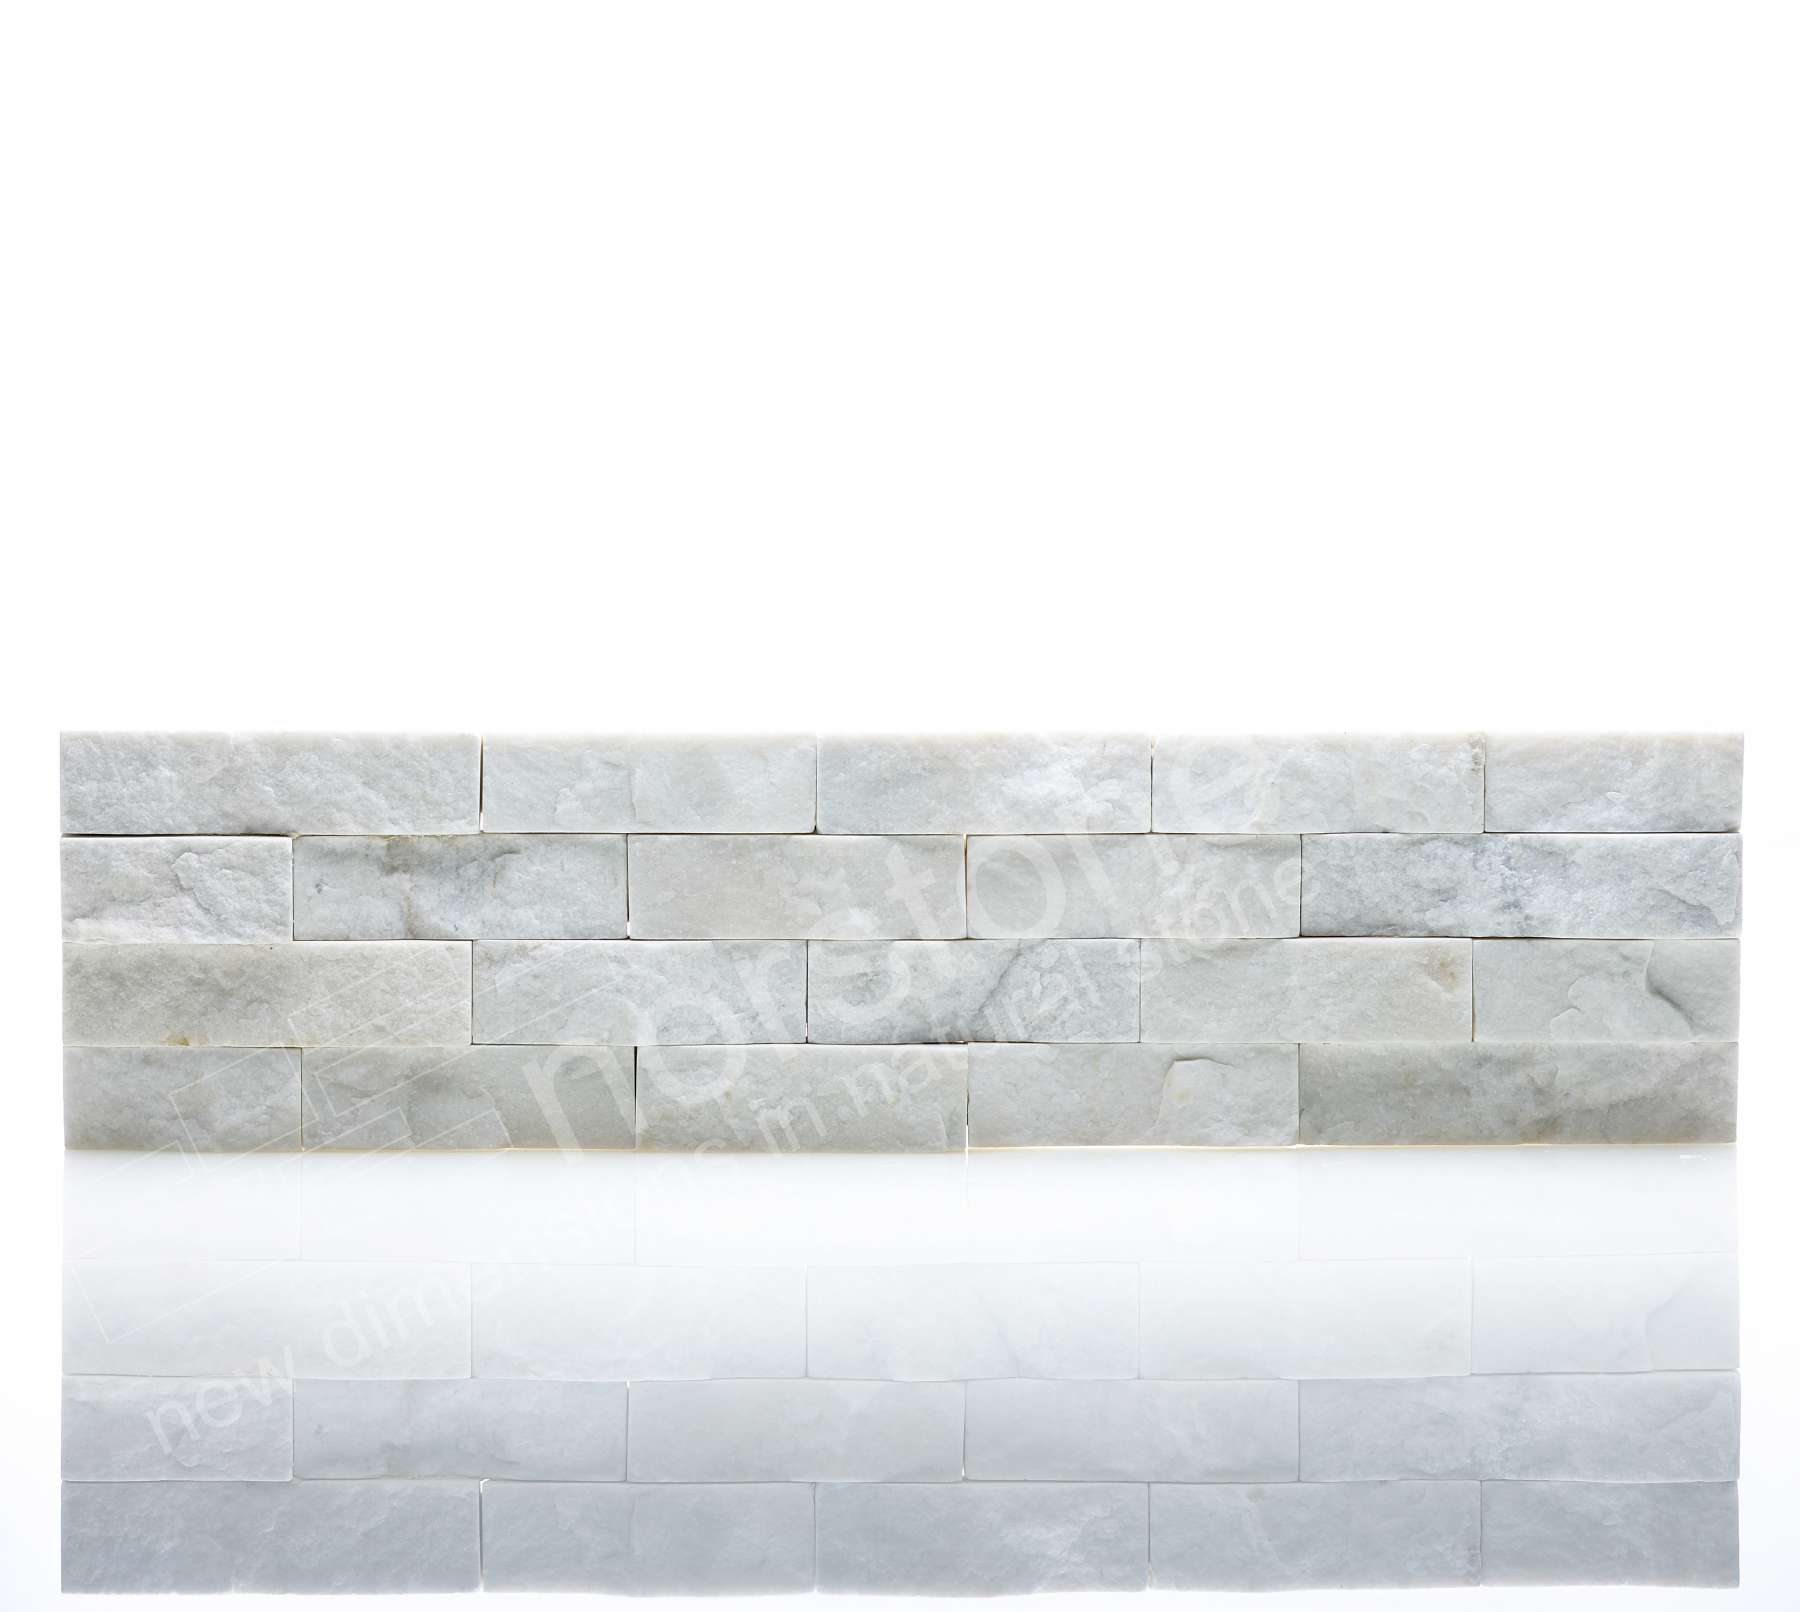 Comparing loose stone vs stone panel systems and which one is right for your stacked stone project